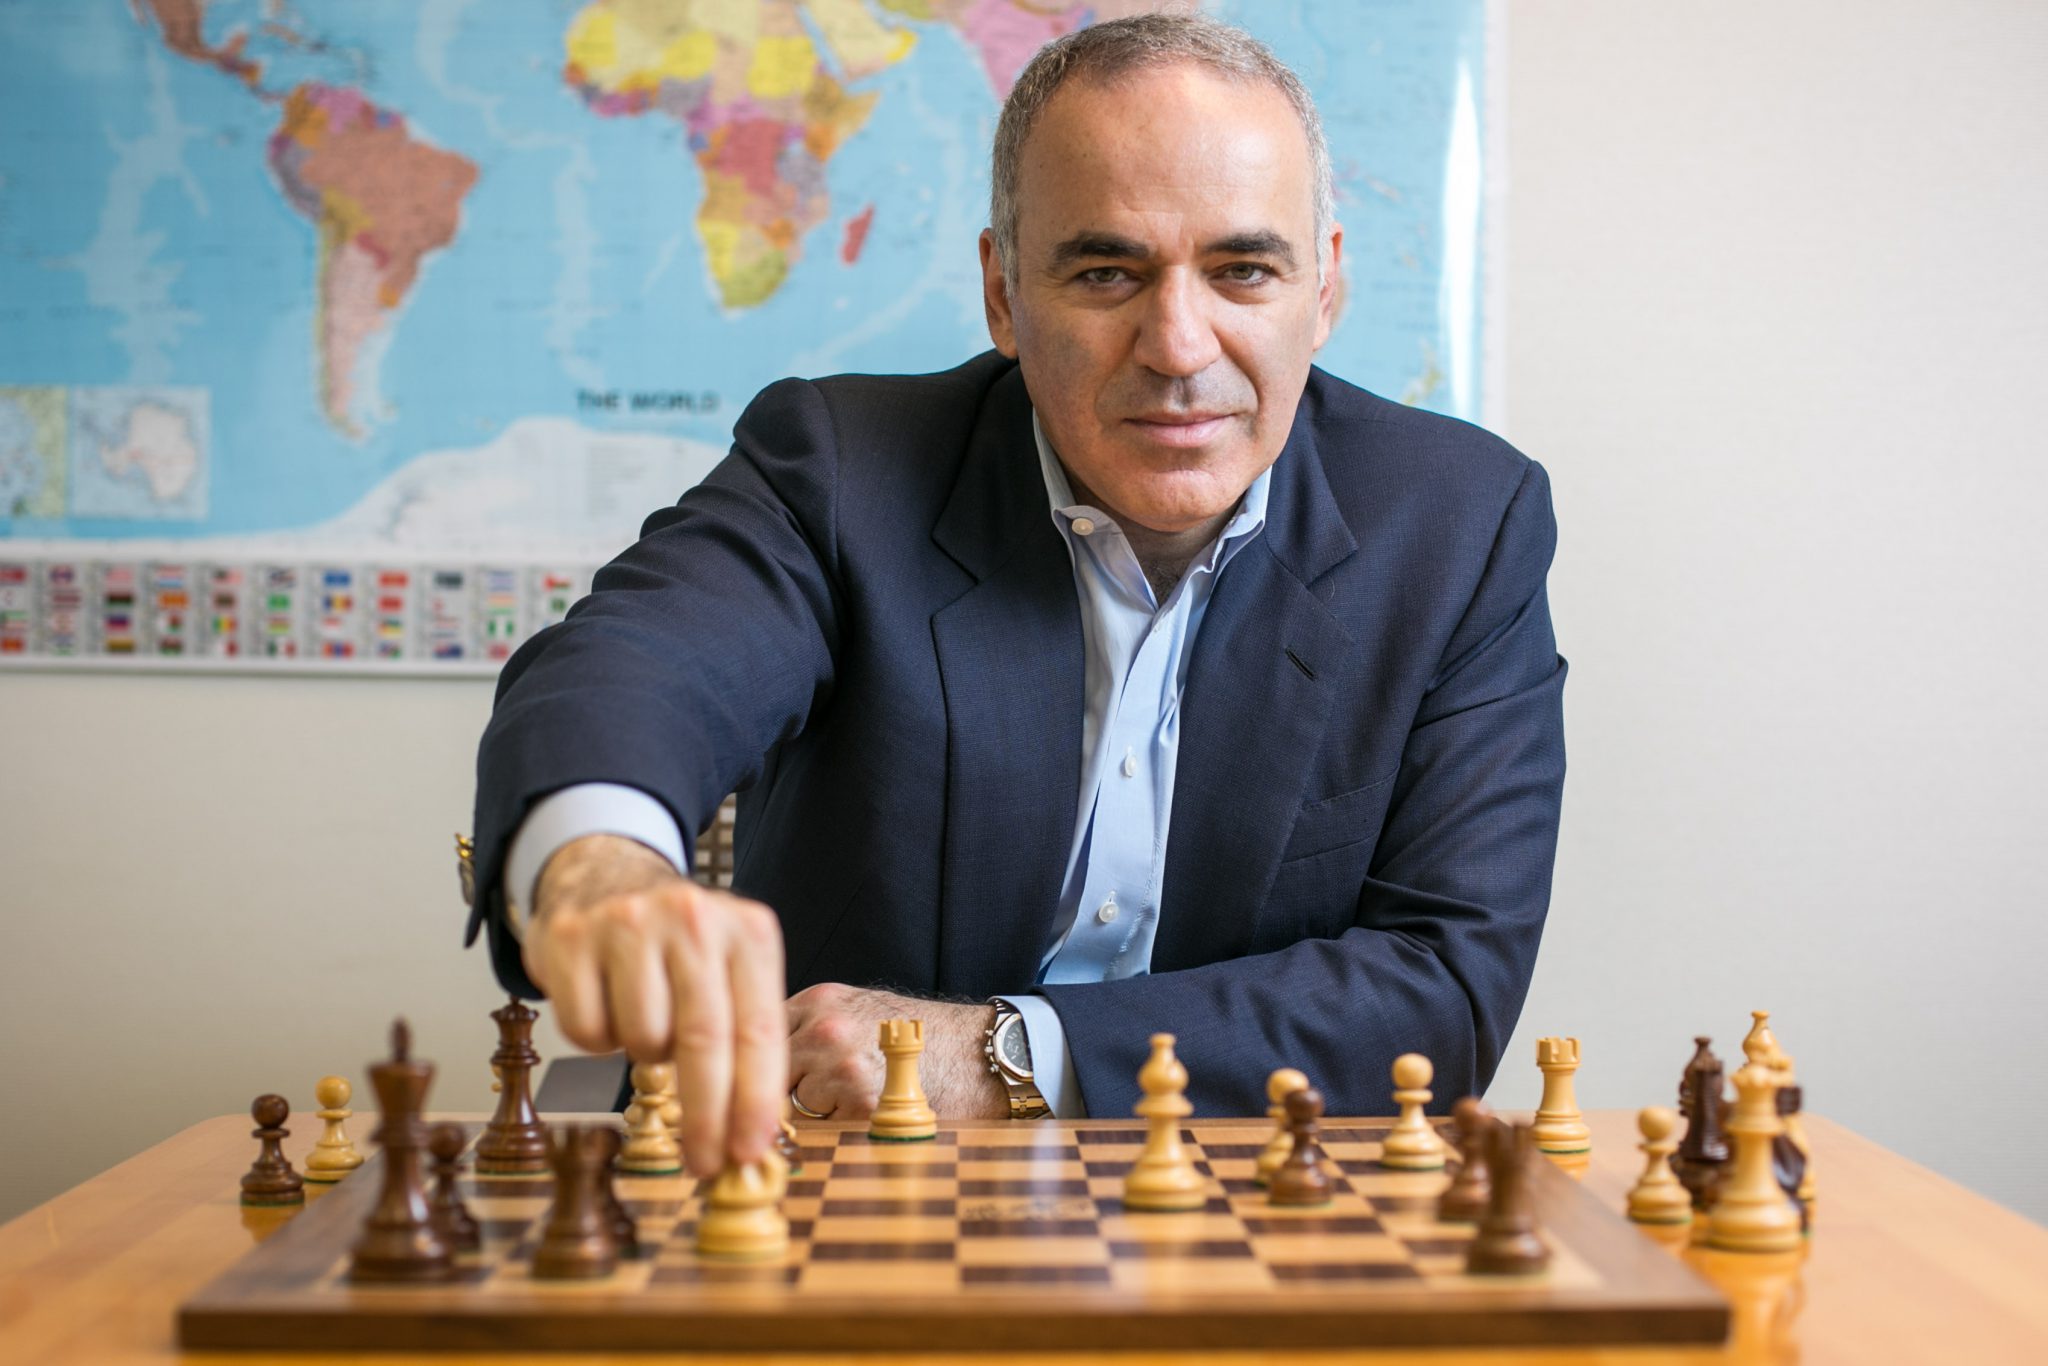 Who did Kasparov call a talented amateur? - Quora